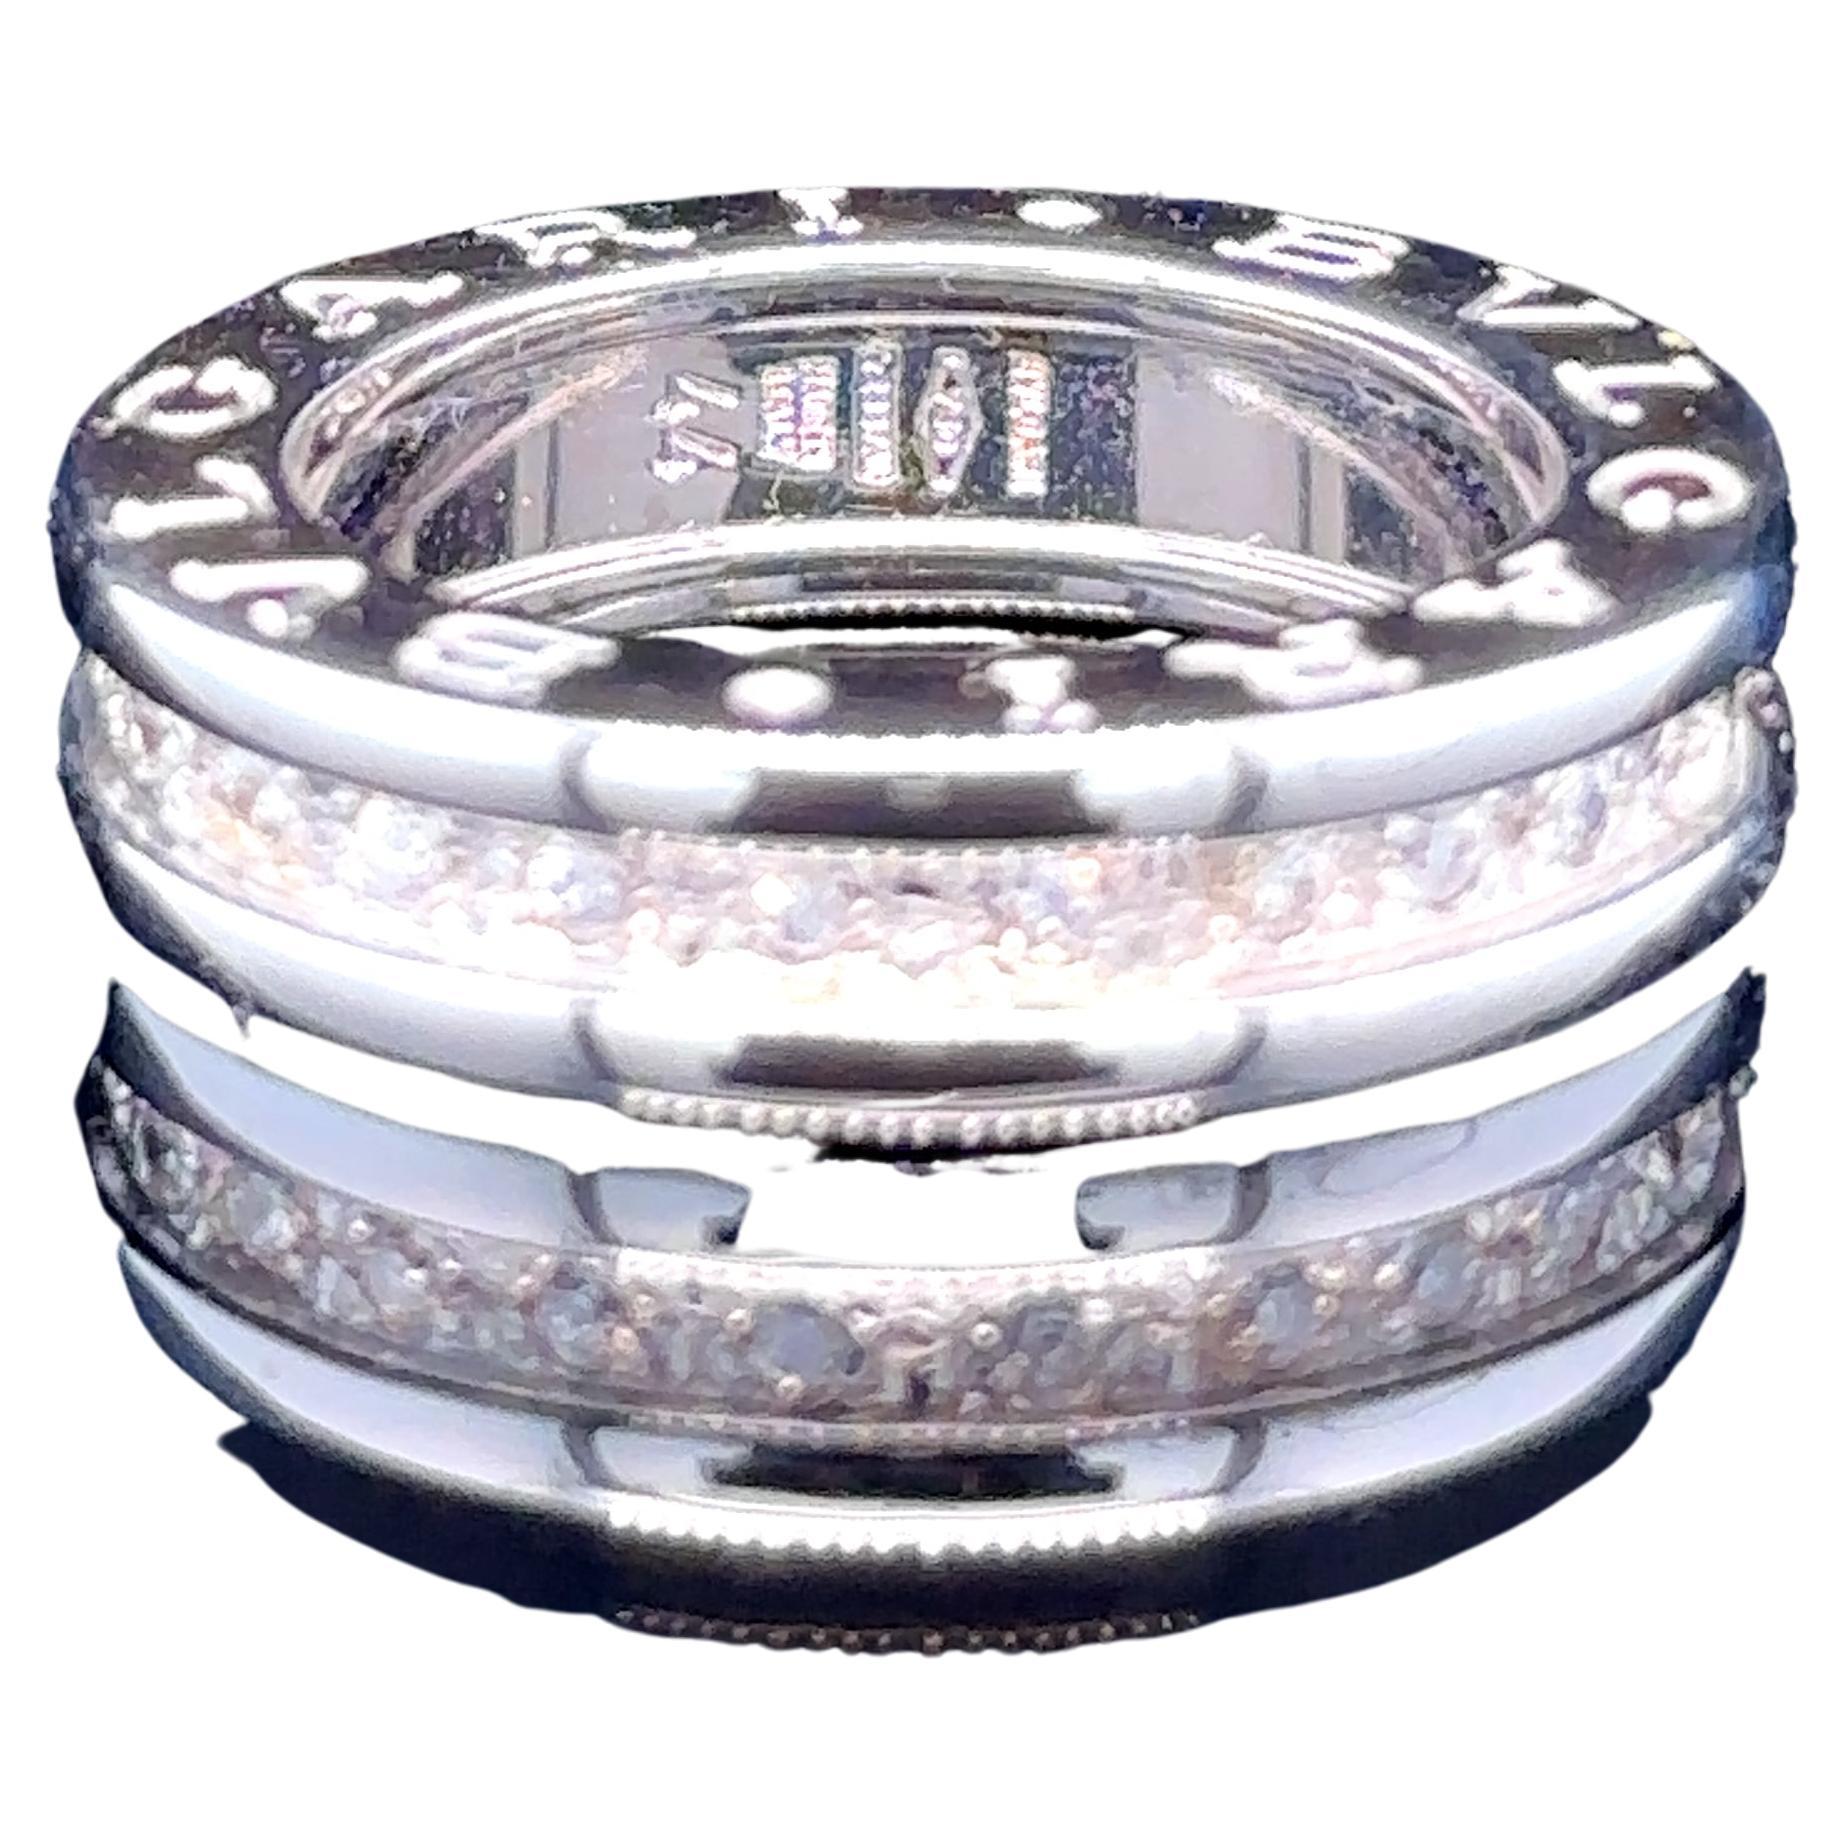 Unique features: 

A B.Zero1 one-band ring

A Bulgari ring. Made of 18 kt White Gold, and ring size of F, and weighing 6 gm, with a polished pattern.

Total quantity of 22 round, brilliant cut Diamonds, colour G and clarity VS. with a total weight